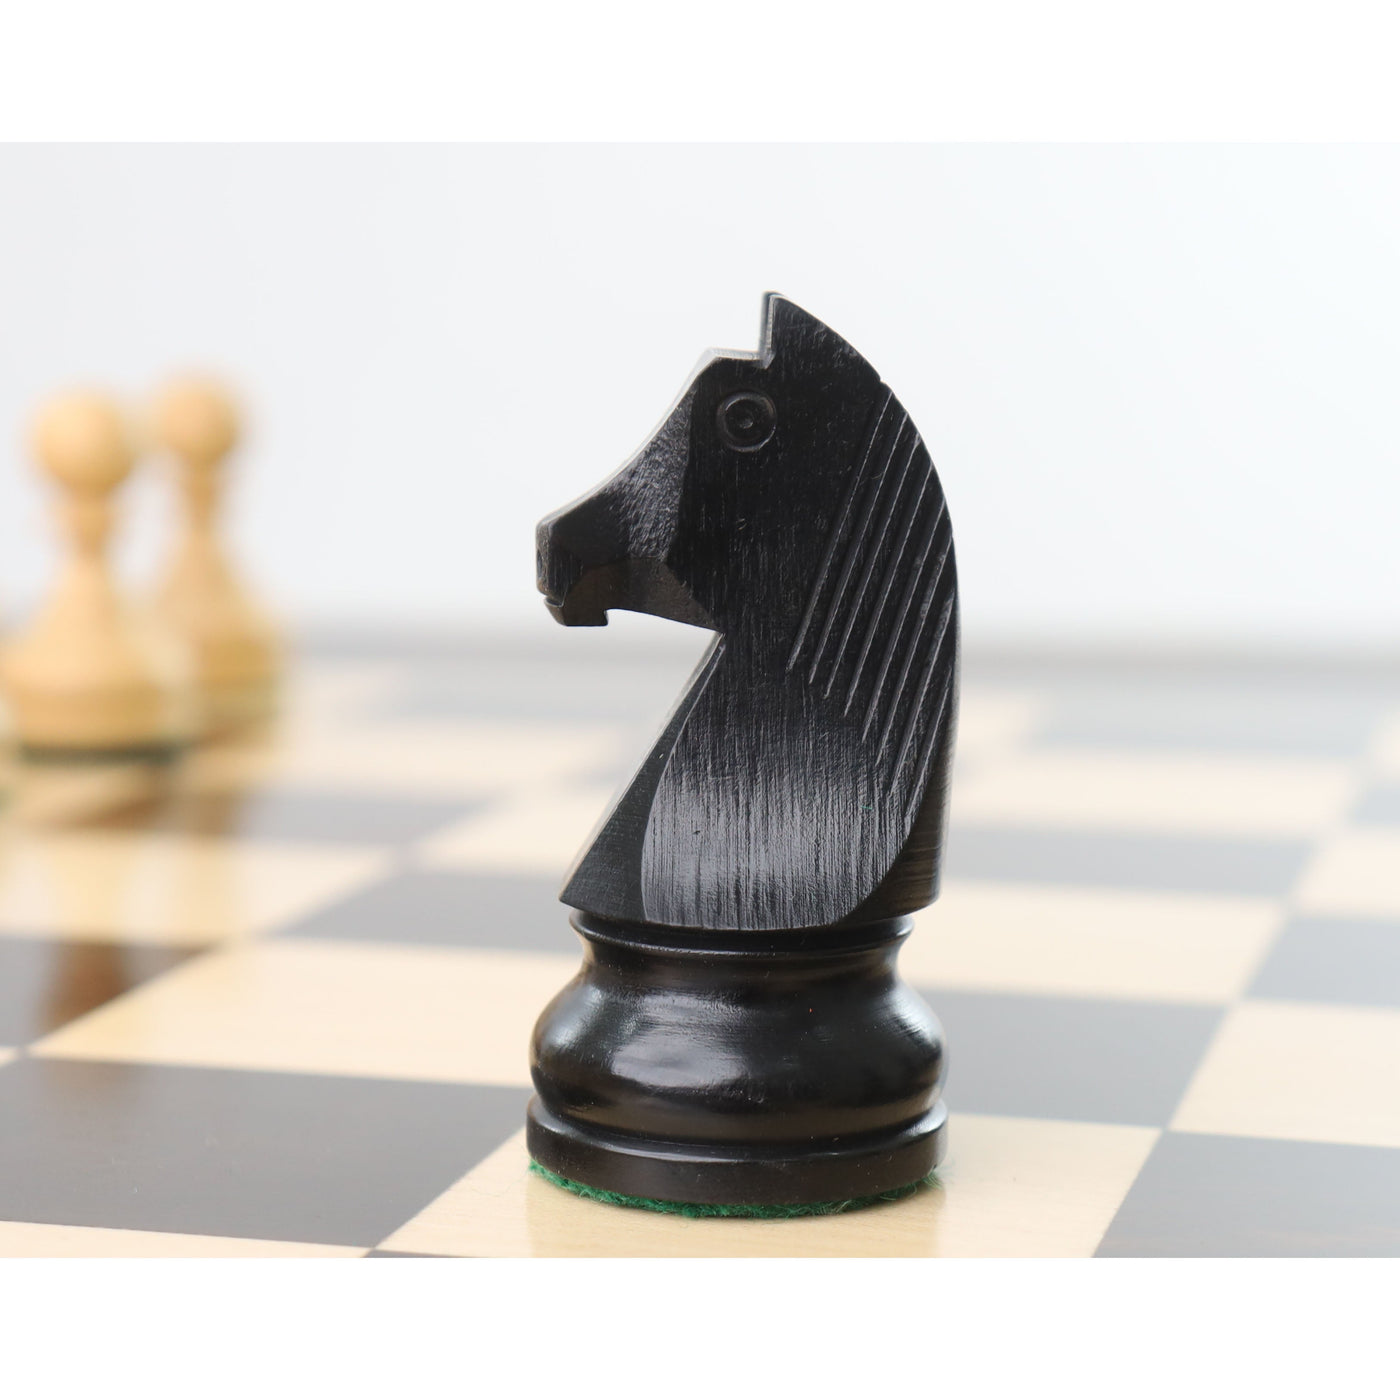 3.9" Tournament Chess Set - Chess Pieces Only in Ebonised Weighted wood with Extra Queens